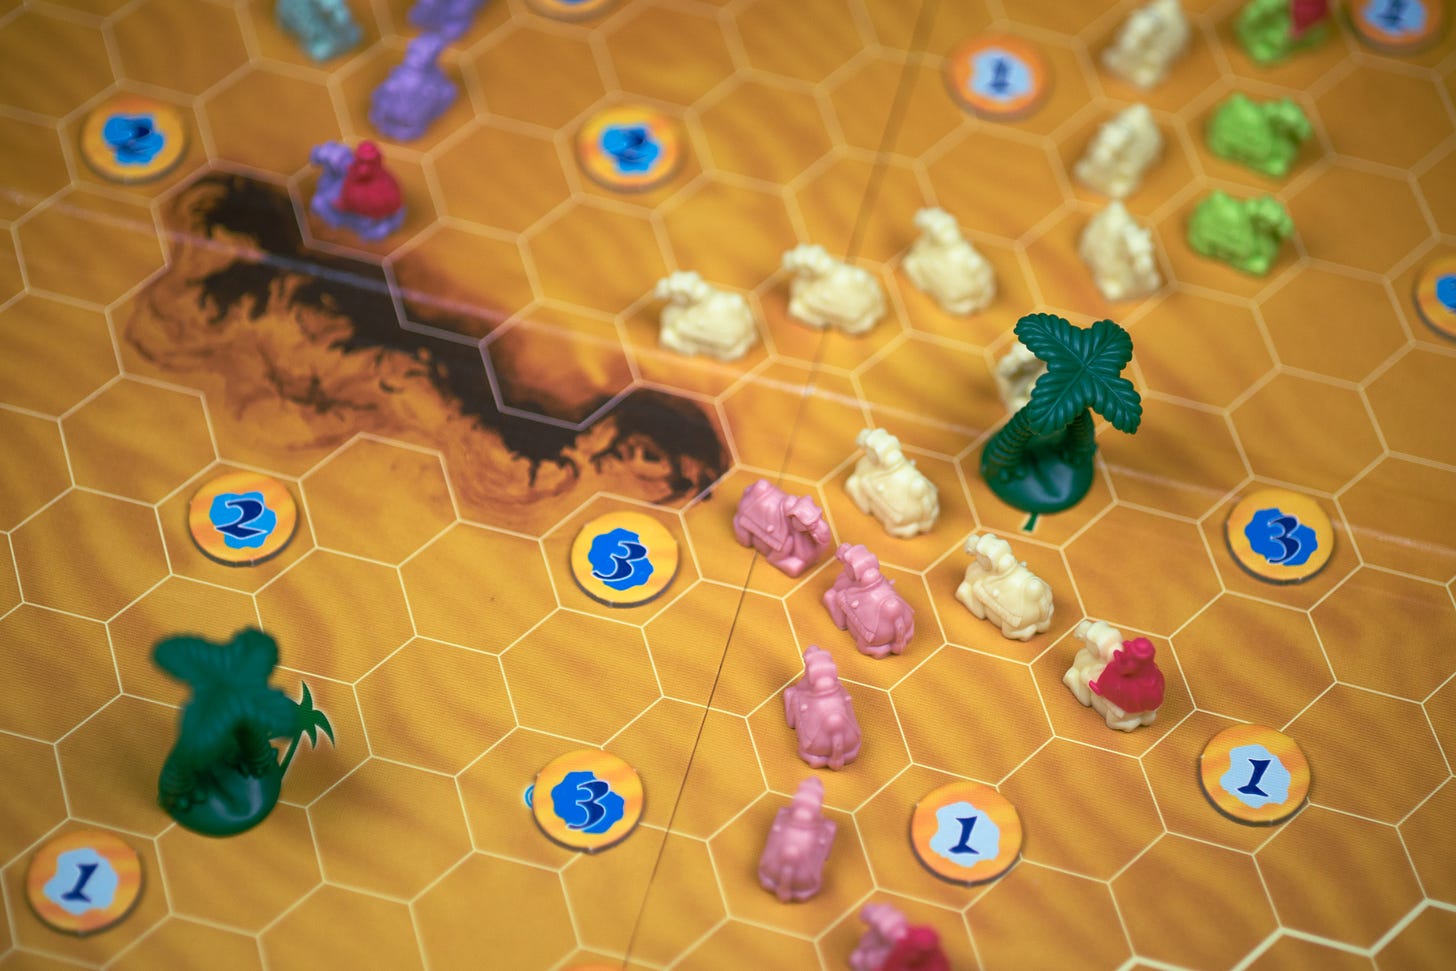 The board game Through the Desert, with pink, purple and yellow camel pieces visible.